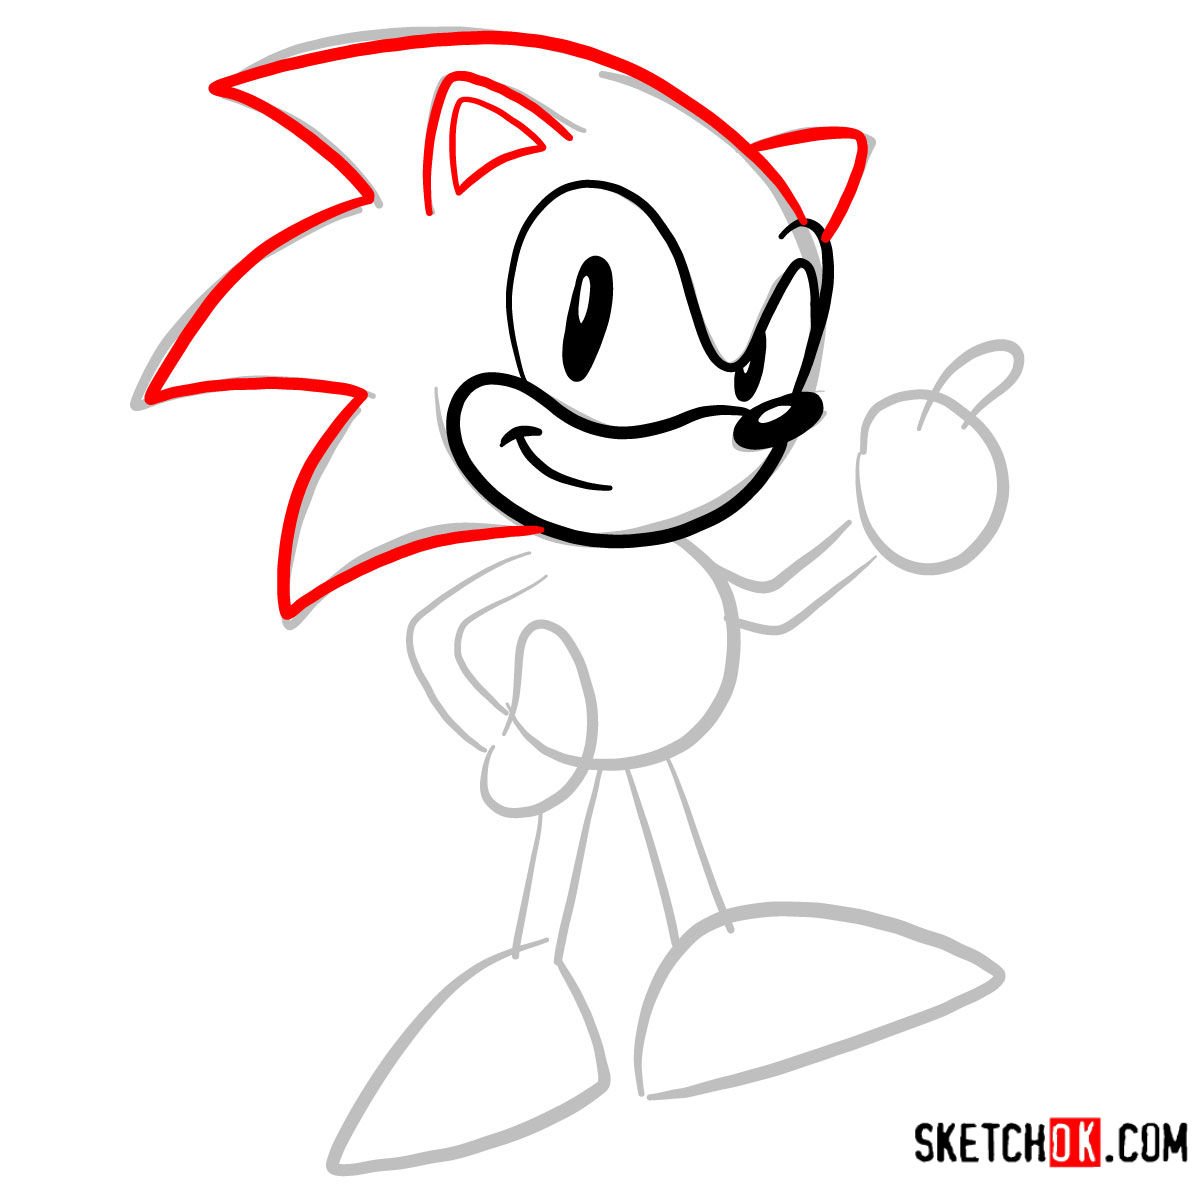 How to draw Sonic the Hedgehog SEGA games style - step 03